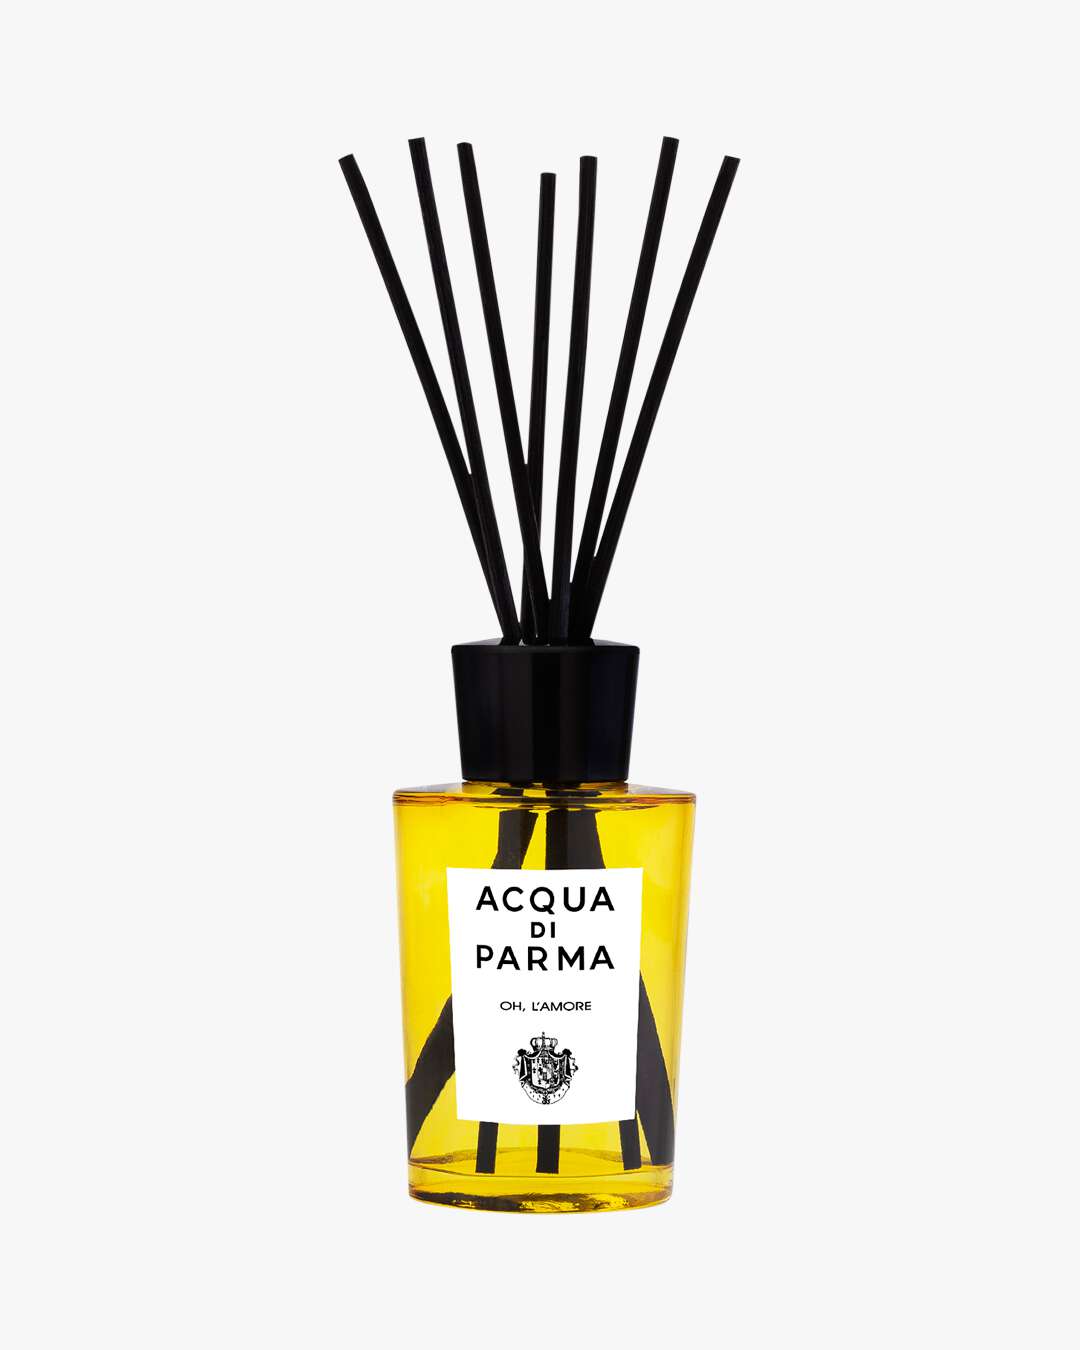 Oh, L'Amore Room Diffuser 180 ml